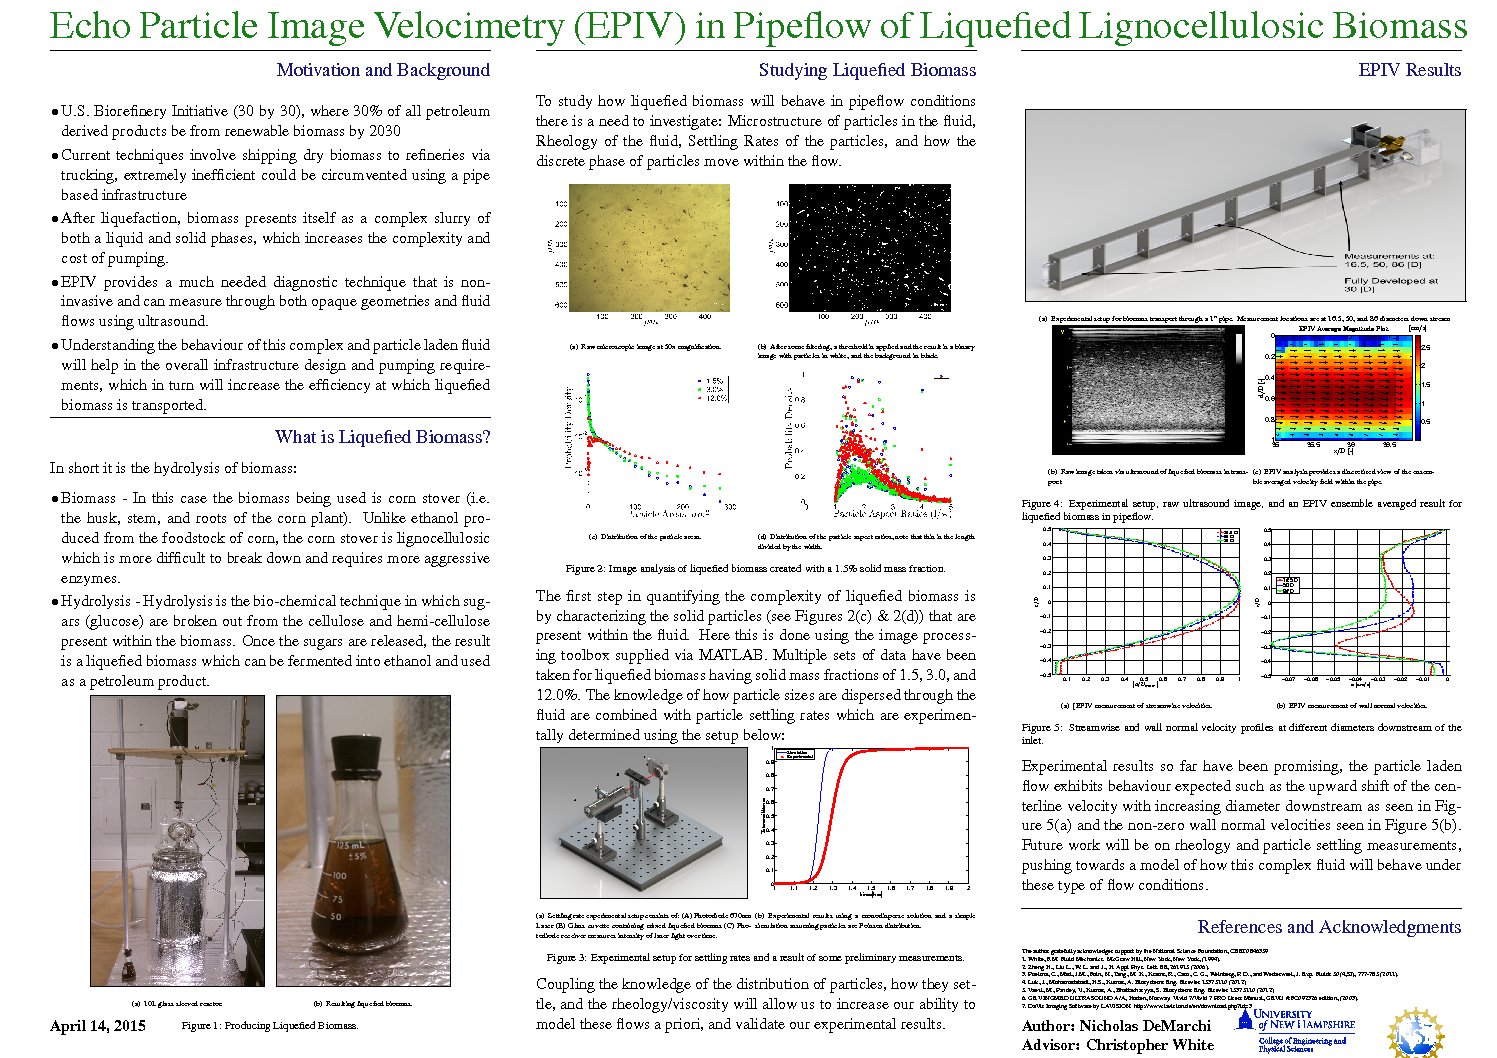 Echo Particle Image Velocimetry (Epiv) In Pipeflow Of Liquefied Lignocellulosic Biomass by nkf4